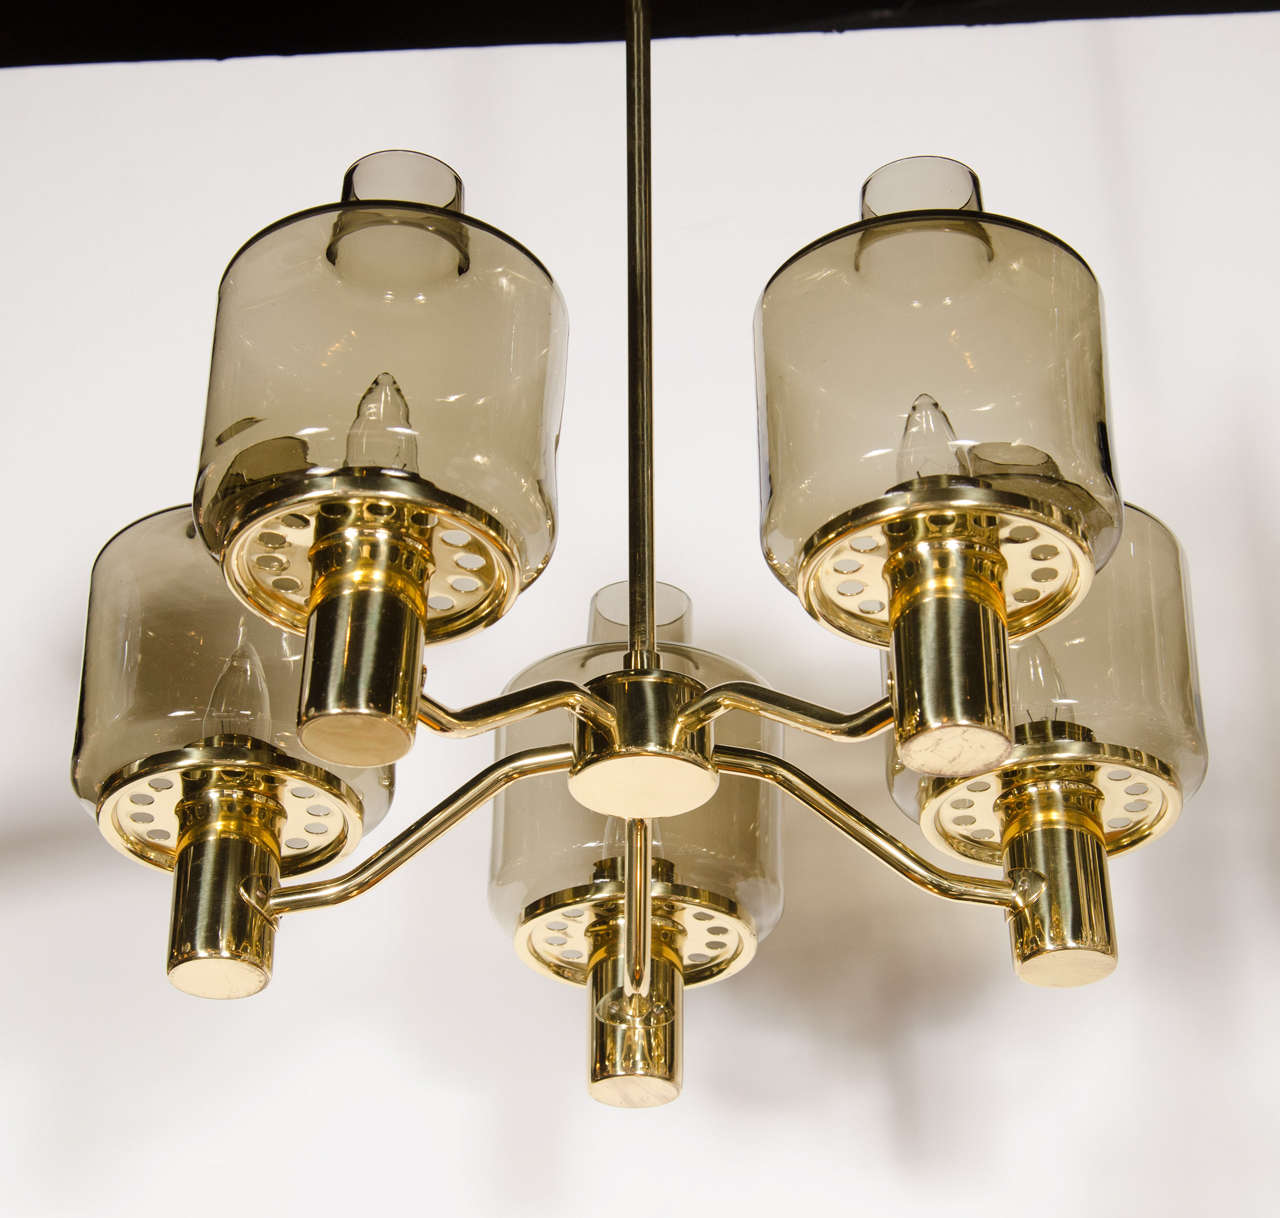 Swedish Midcentury Chandelier in Brass and Smoked Glass Globes by Hans-Agne Jakobsson